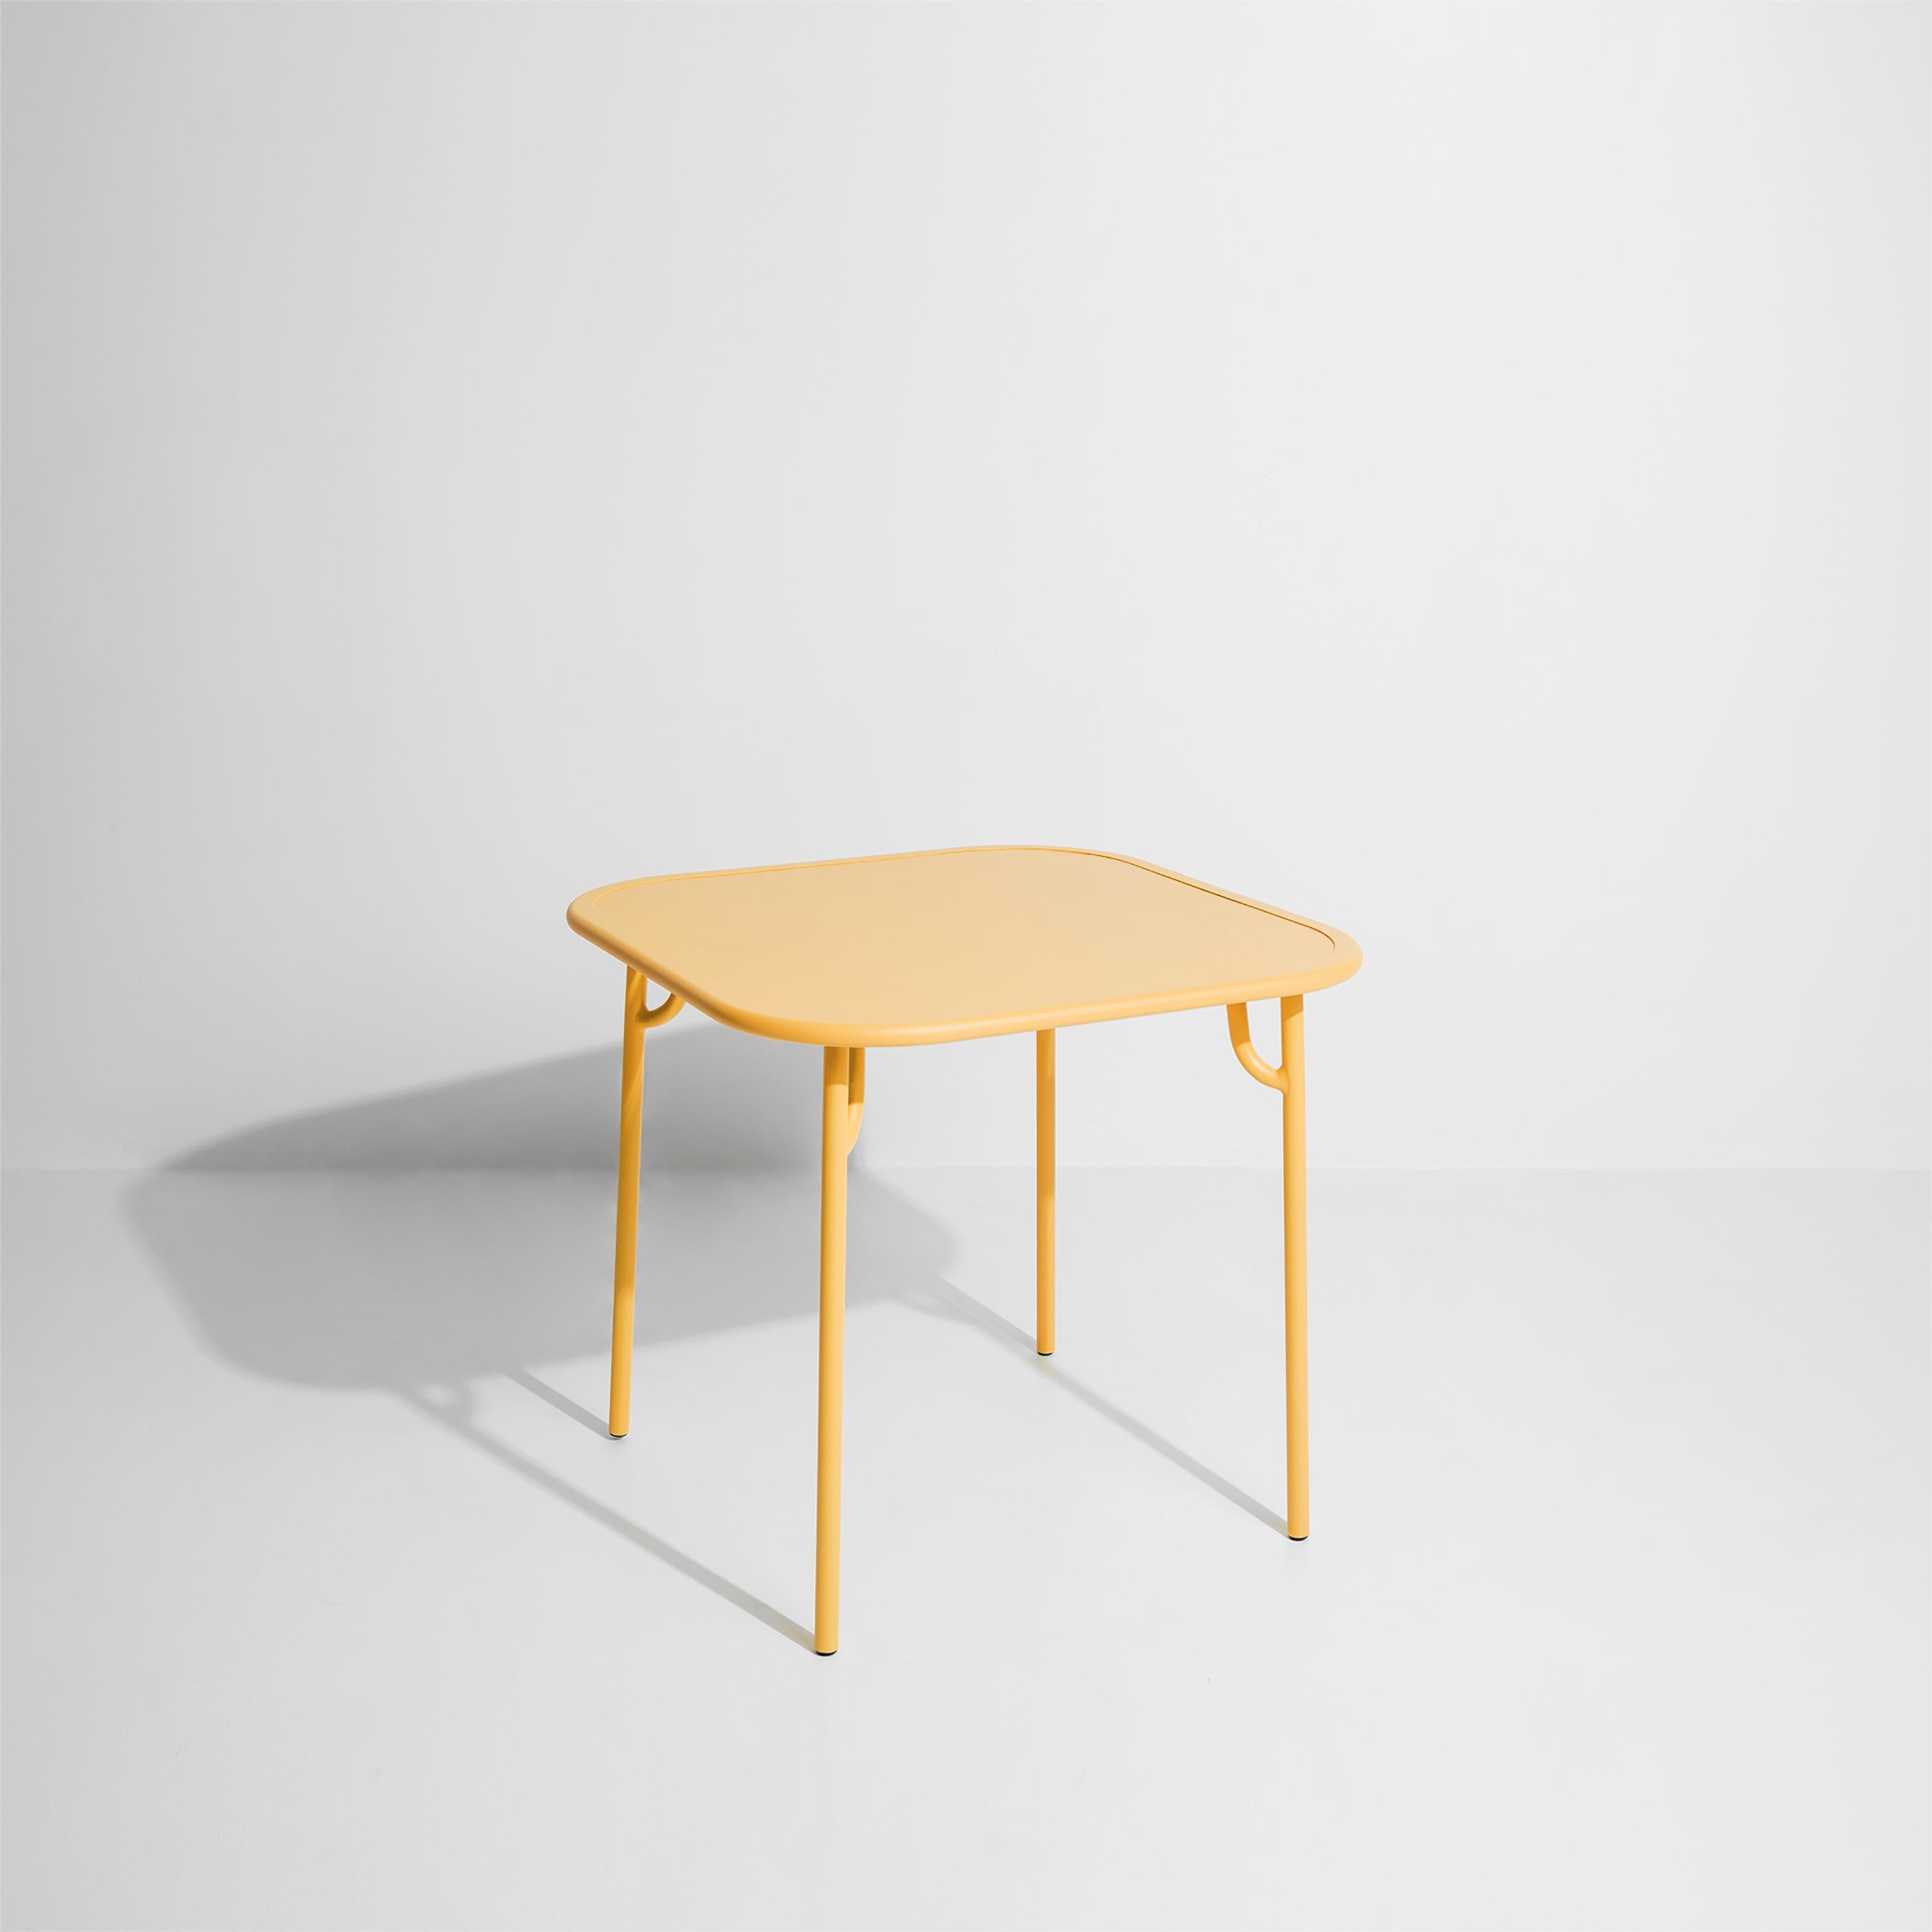 Petite Friture Week-End Plain Square Dining Table in Saffron Aluminium by Studio BrichetZiegler, 2017

The week-end collection is a full range of outdoor furniture, in aluminium grained epoxy paint, matt finish, that includes 18 functions and 8